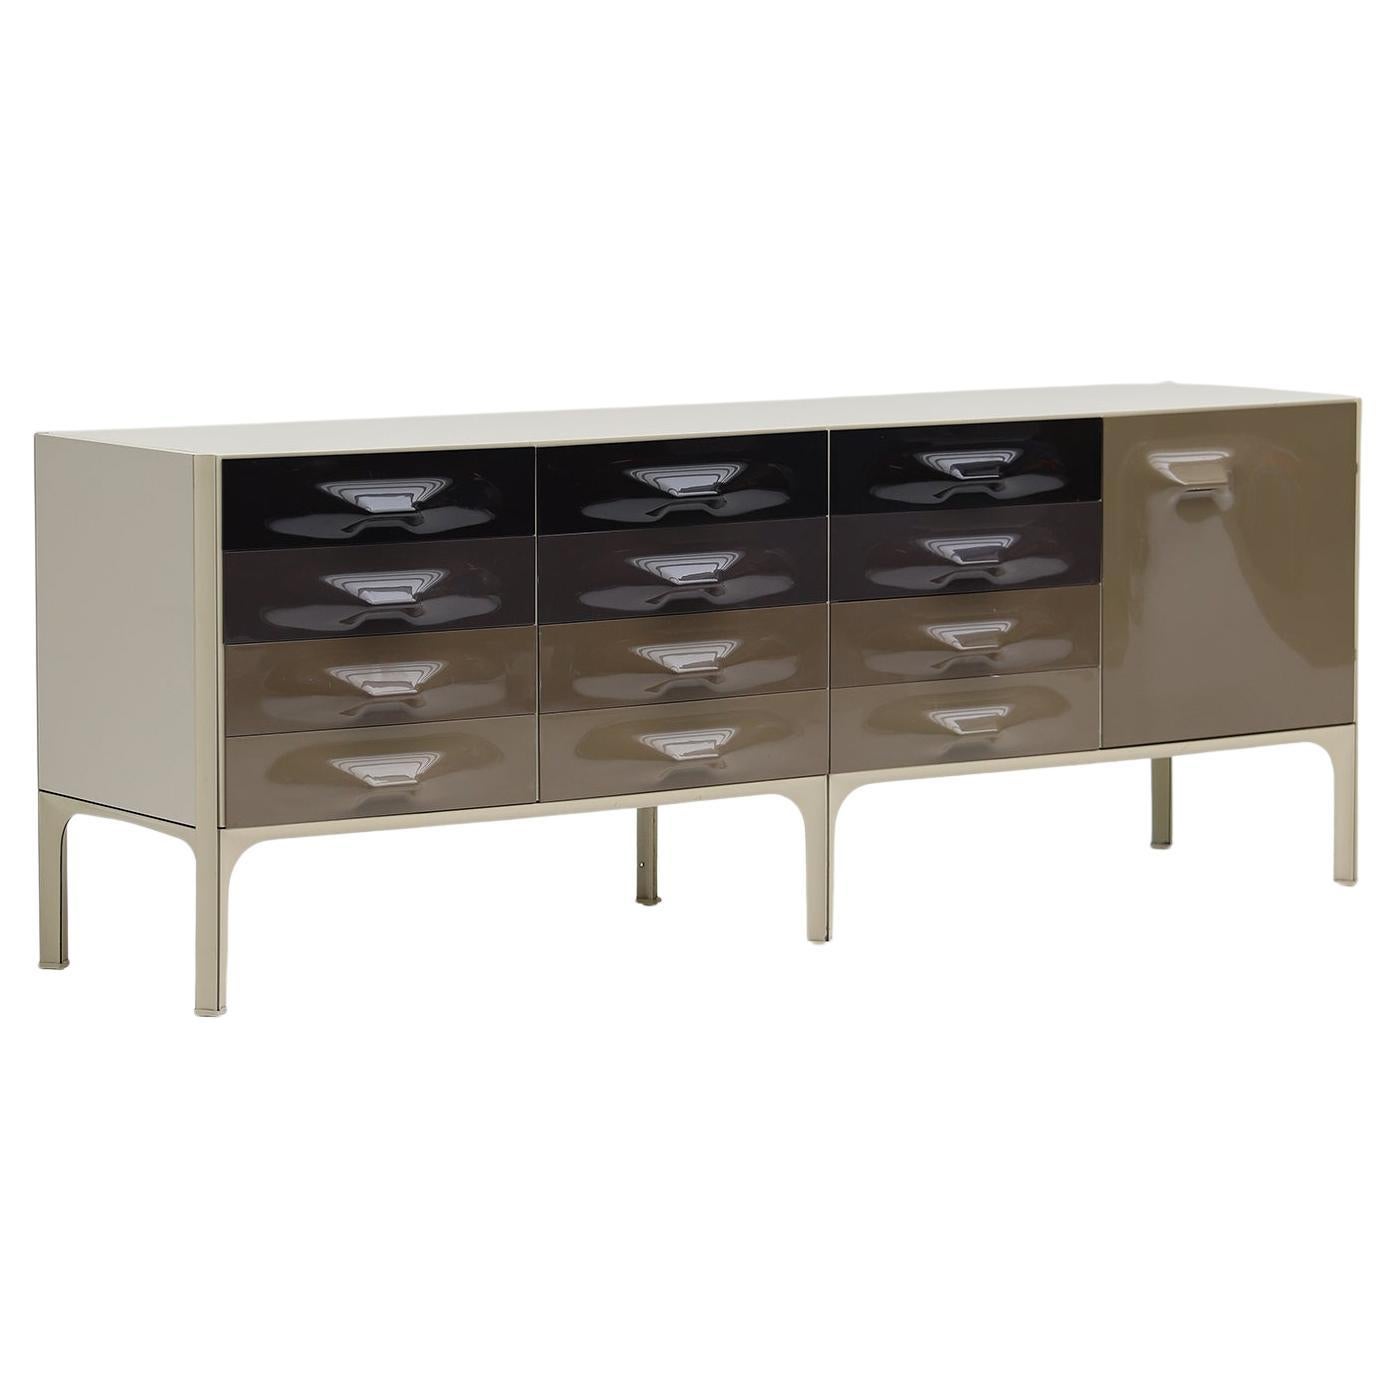 Modern space age DF2000 sideboard by Raymond Loewy for Doubinsky Frères in 1968.